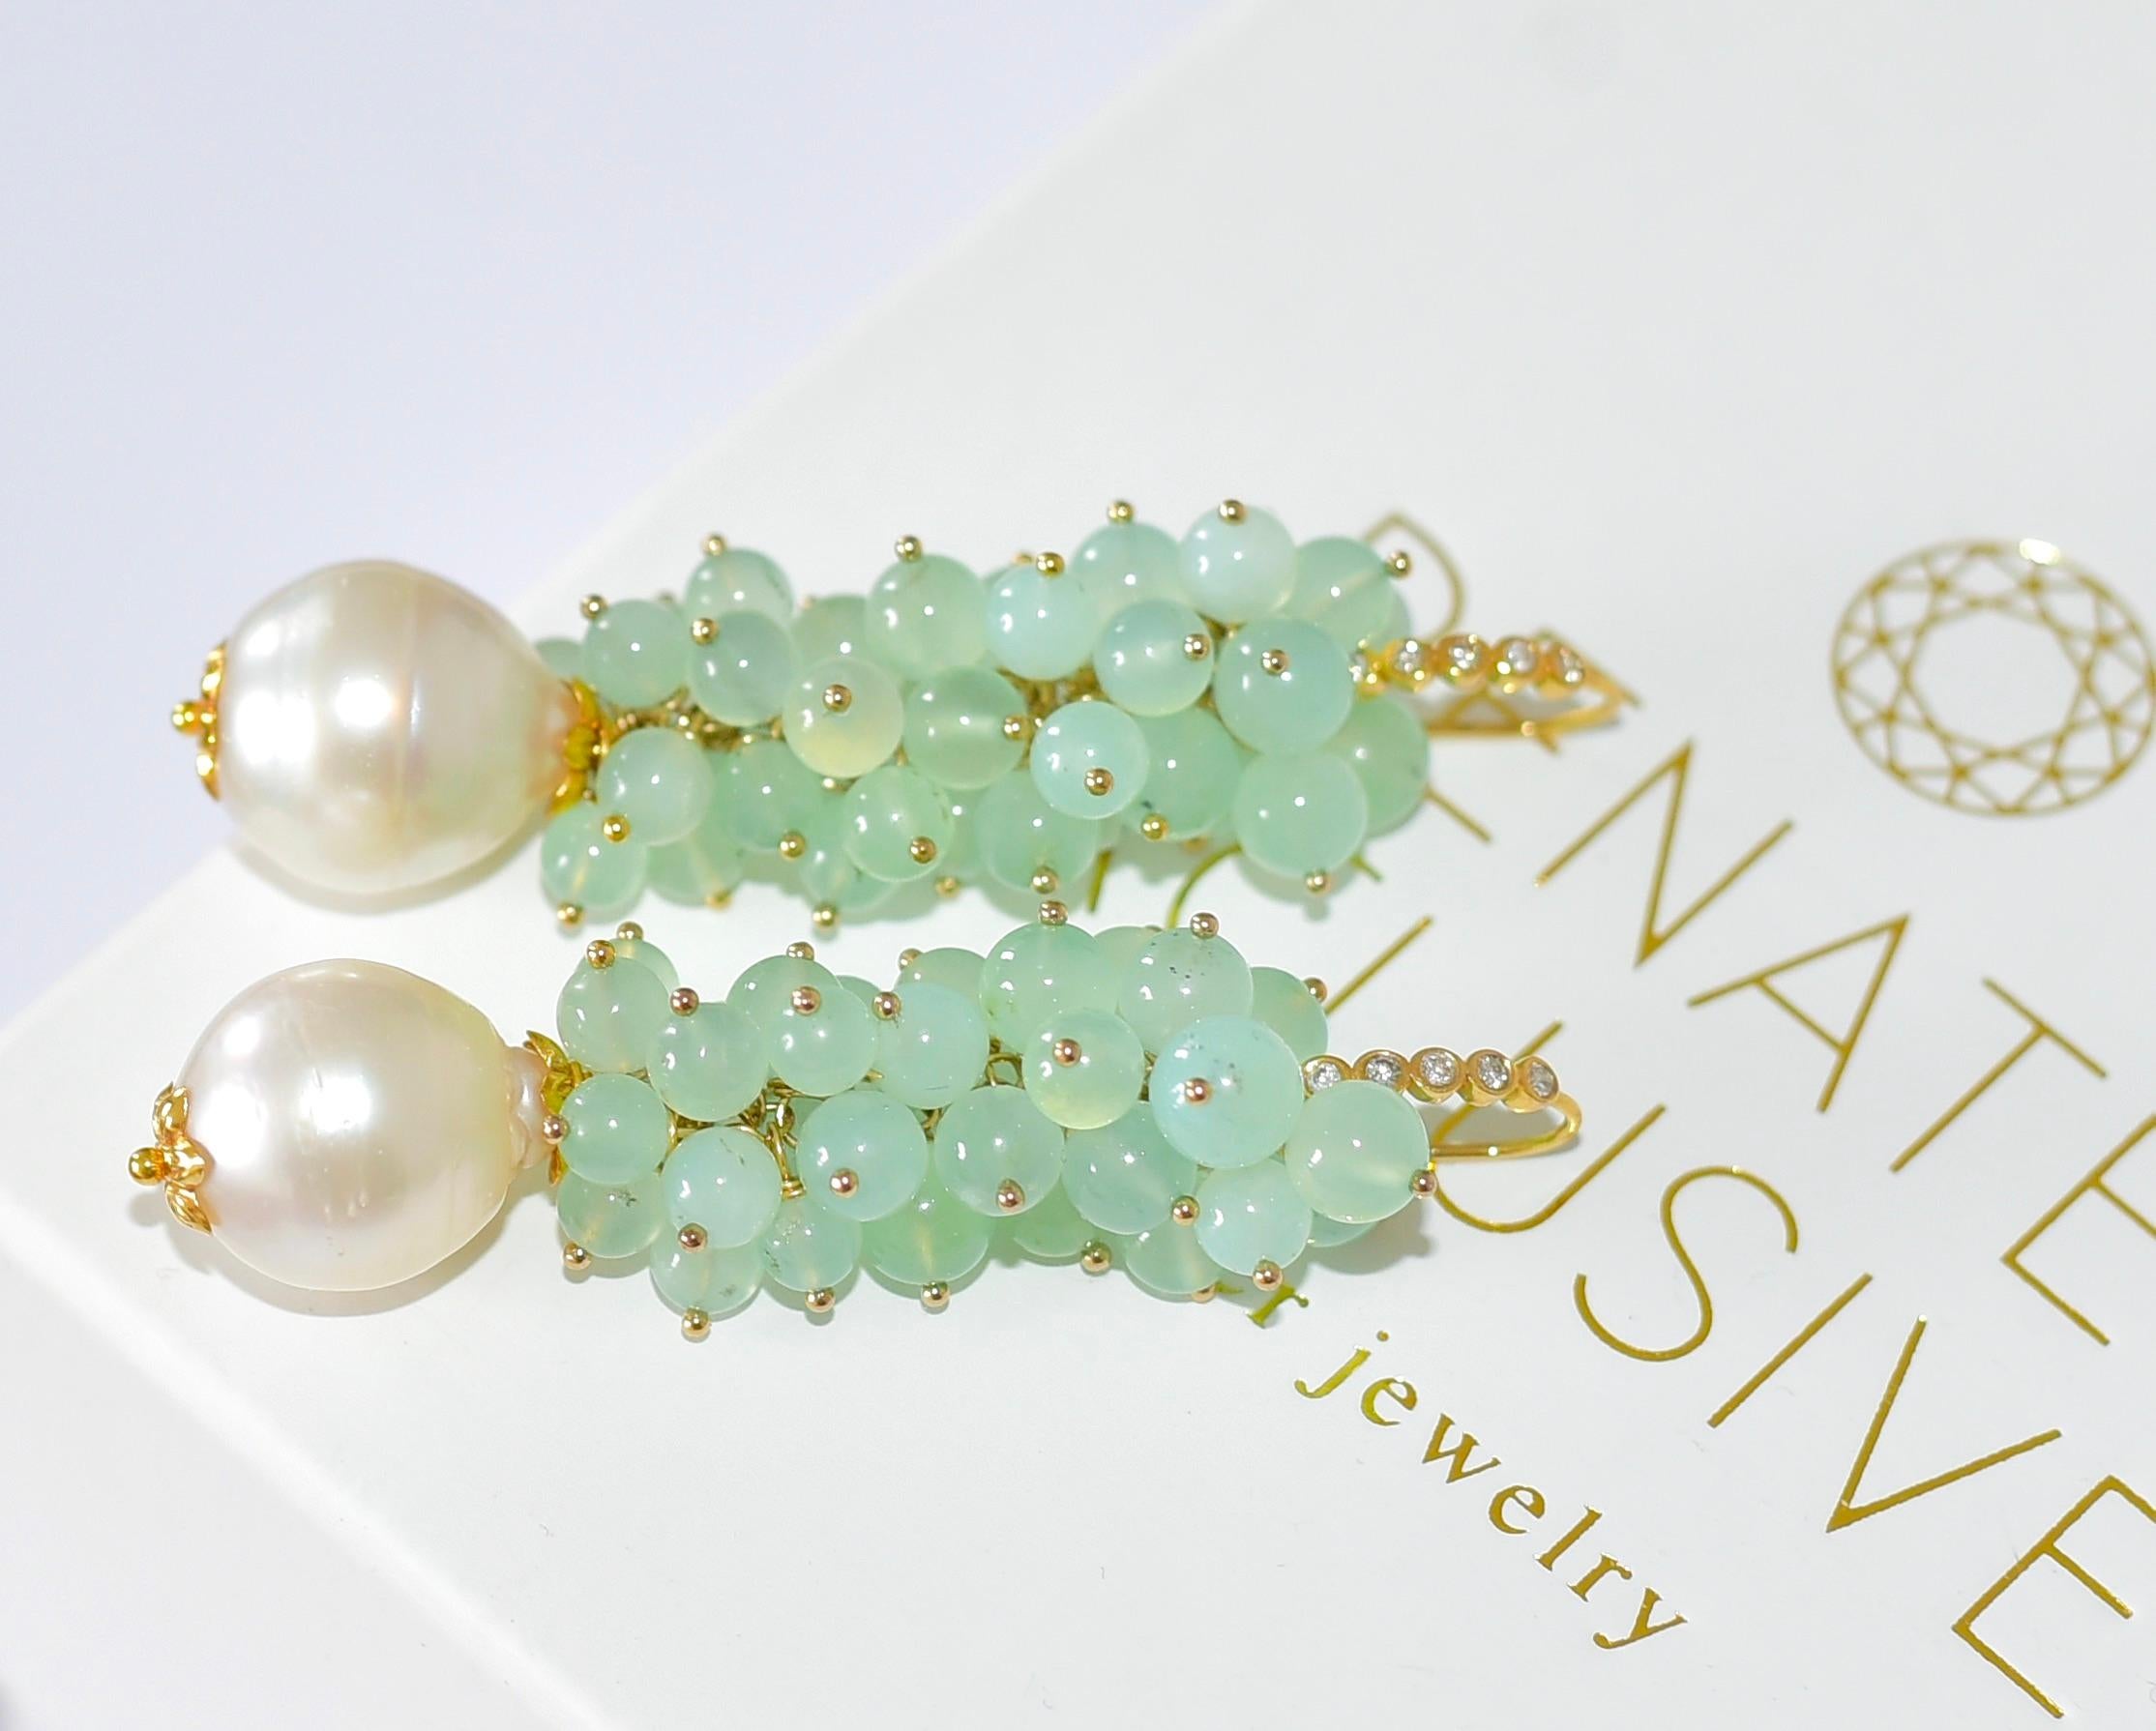 
Absolute unique luxury and remarkable dangling earrings that catch the eye! These are statement earrings, so a little heavier, but not too heavy either.
Earrings materials:
4.2mm-6mm Old Stock Australian Mint Green Chrysoprase Round Sphere Bead.